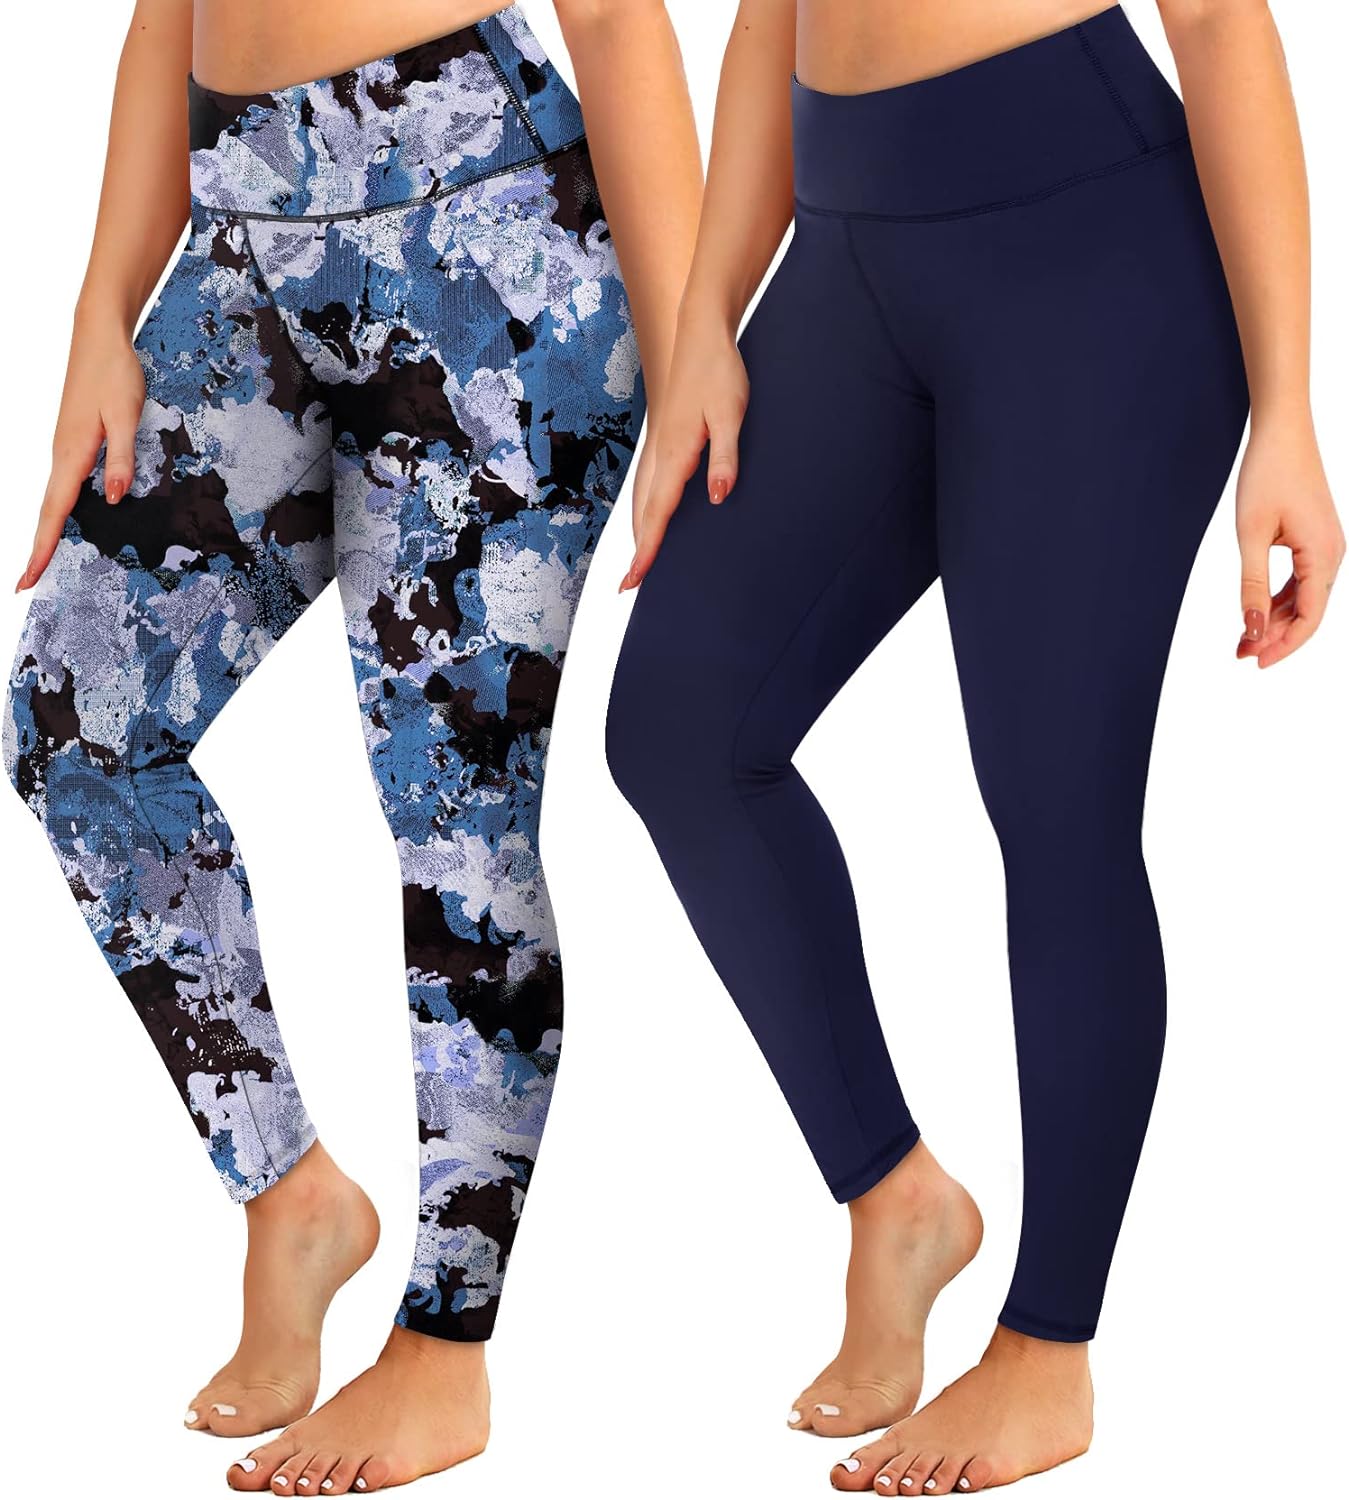 YOLIX 2 Pack Plus Size Leggings with Pockets for Women, High Waisted Tummy Control Soft Black Workout Yoga Pants